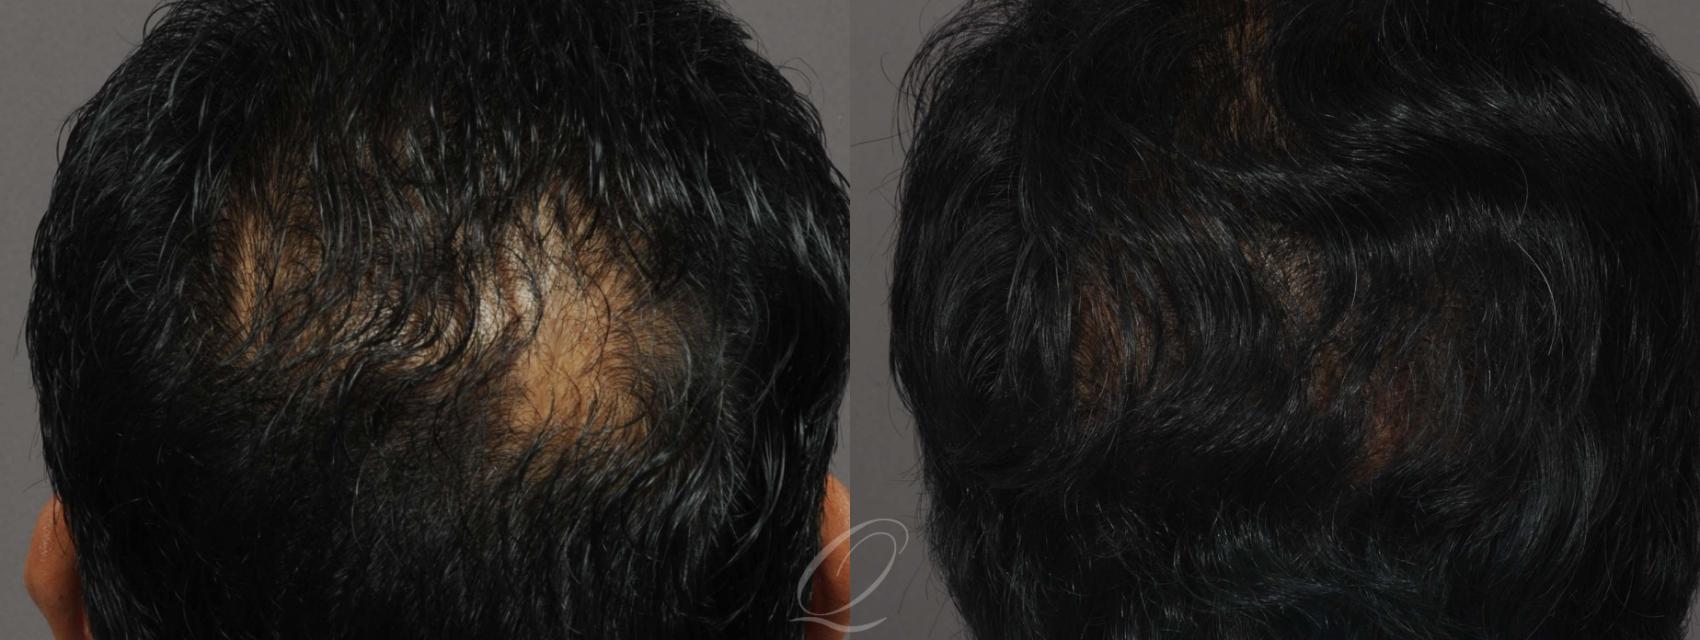 FUT Case 1014 Before & After View #2 | Rochester, NY | Quatela Center for Hair Restoration